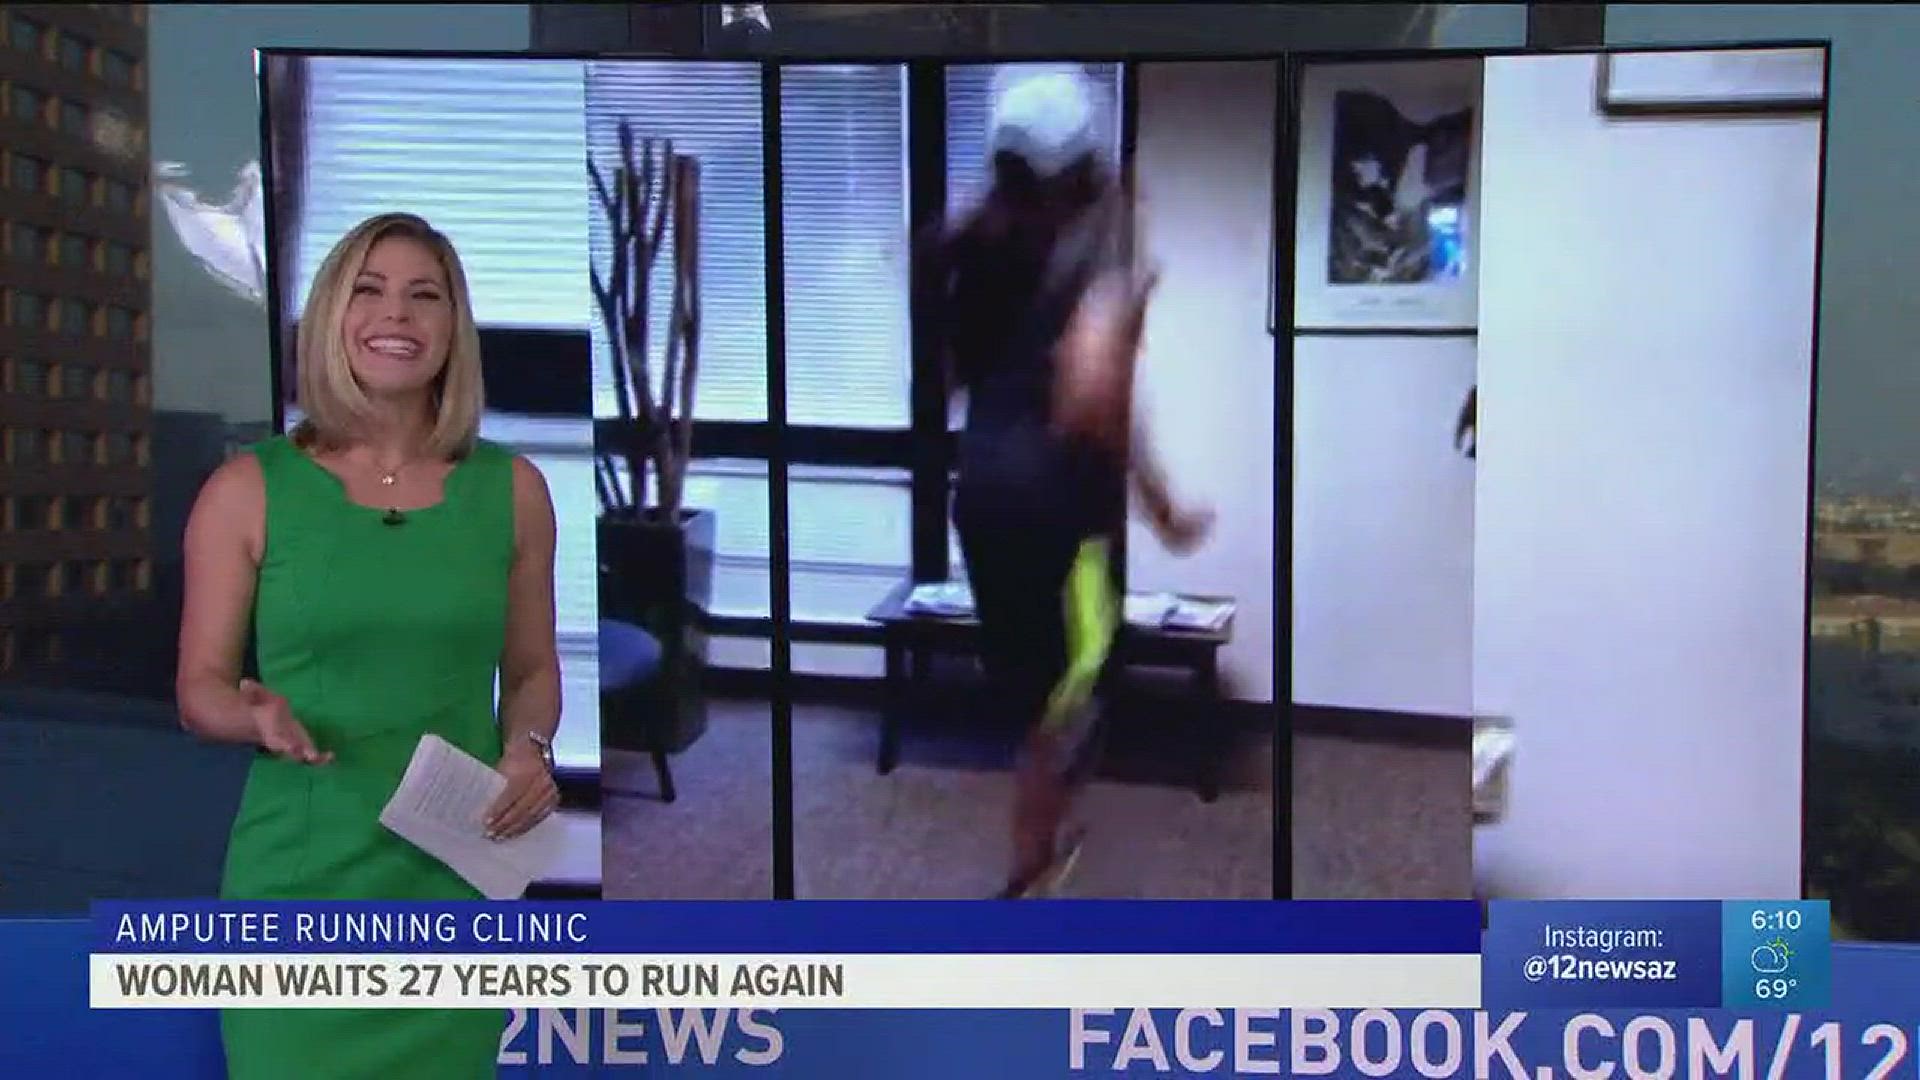 A Phoenix woman has waited 27 years to regain the ability to be active and run after losing her leg to cancer when she was just a young girl.